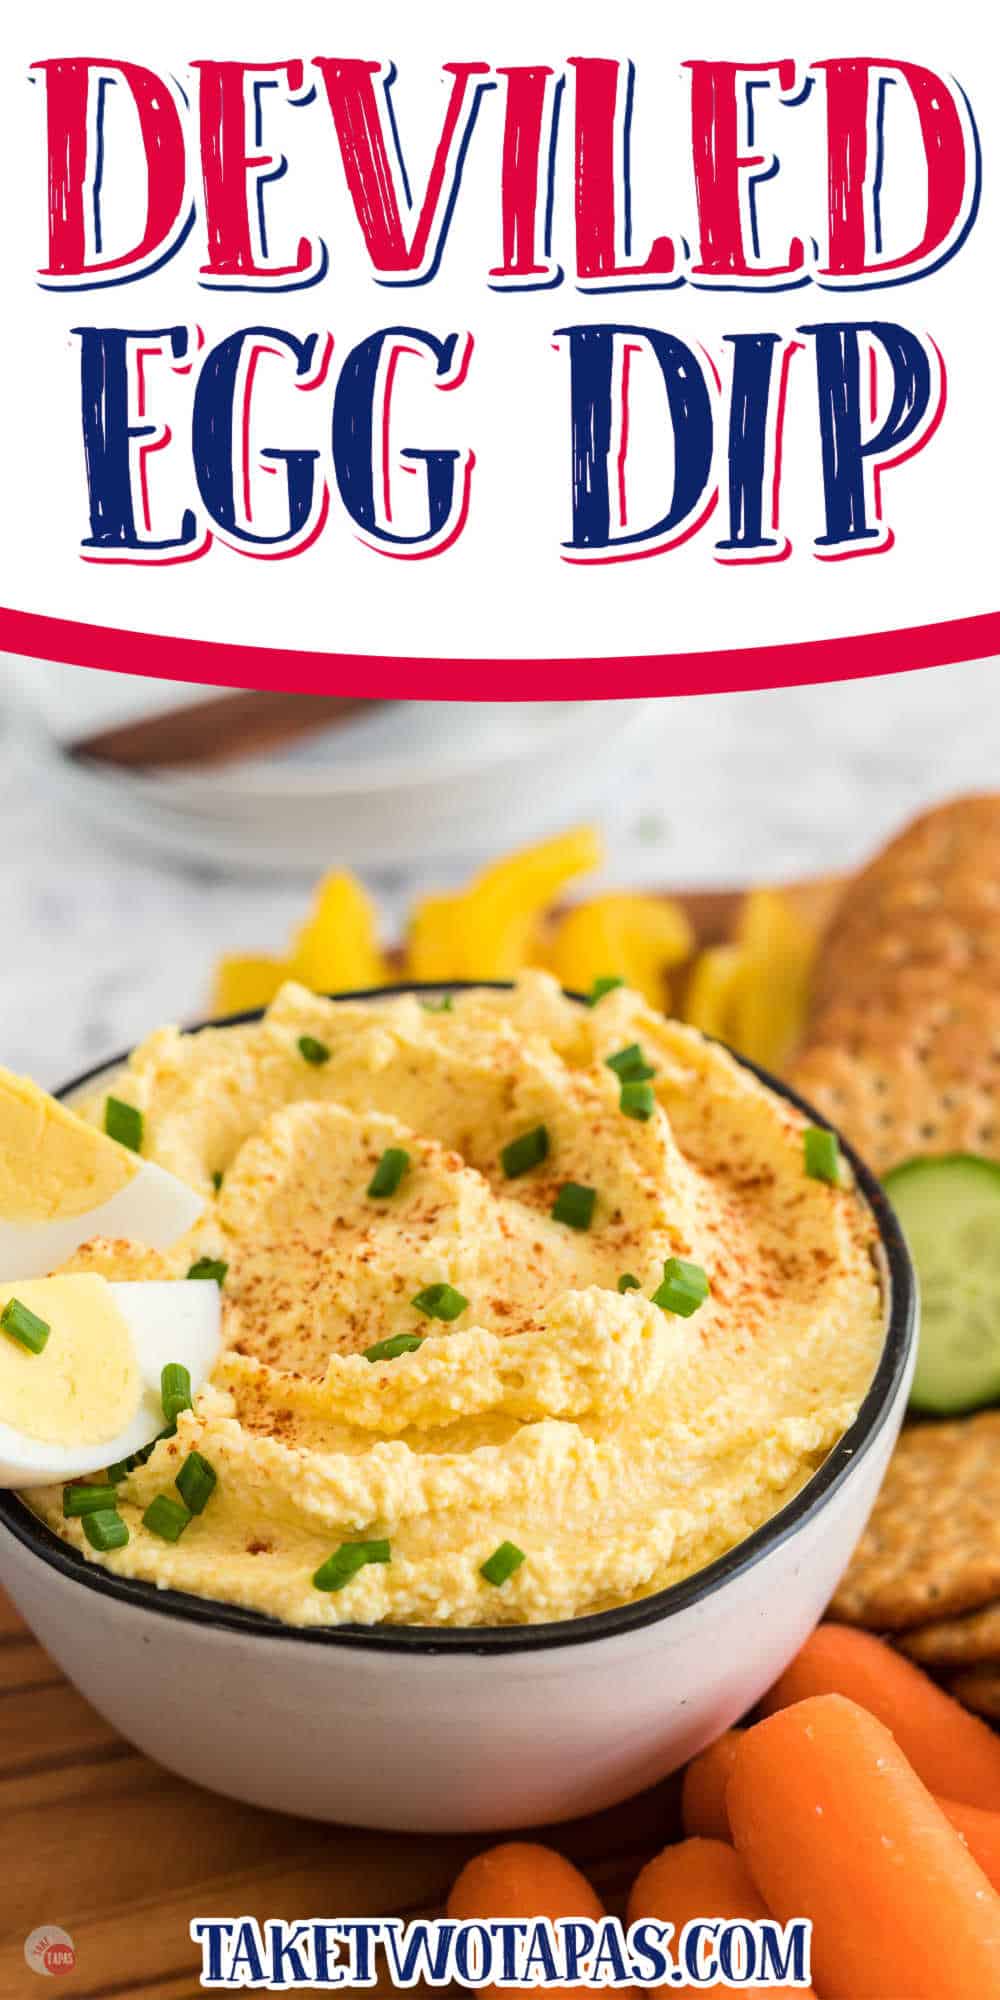 bowl of dip with text "deviled egg dip"